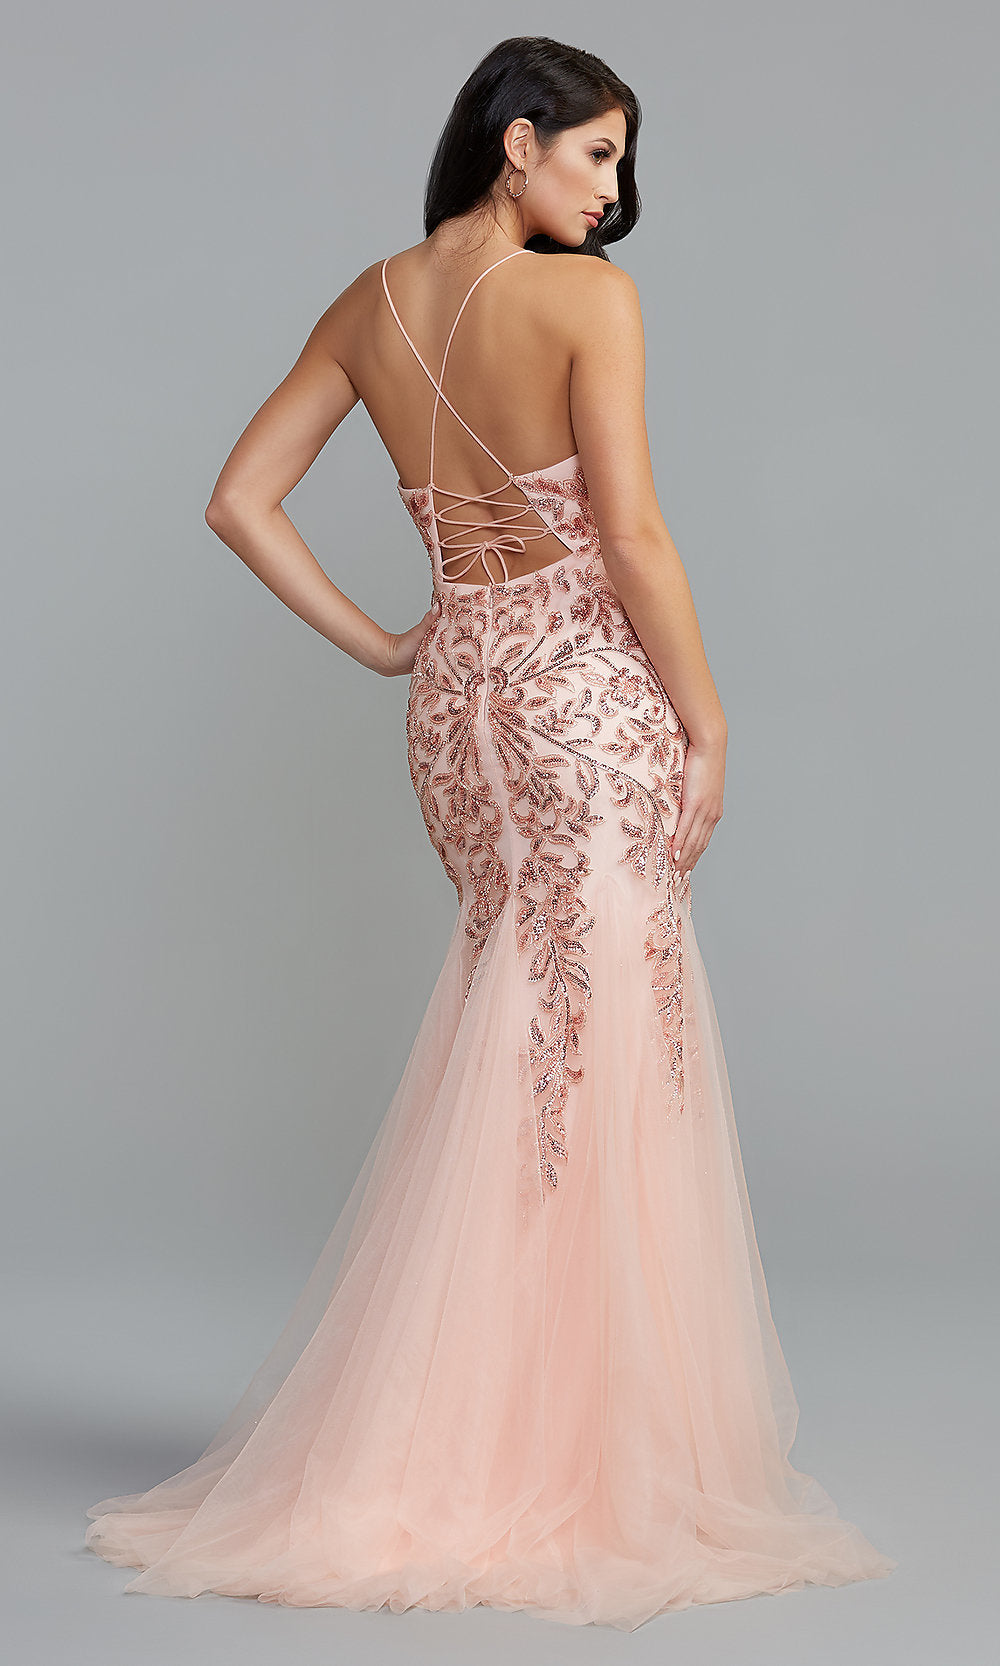  Long Mermaid Prom Dress with Sequin Floral Design